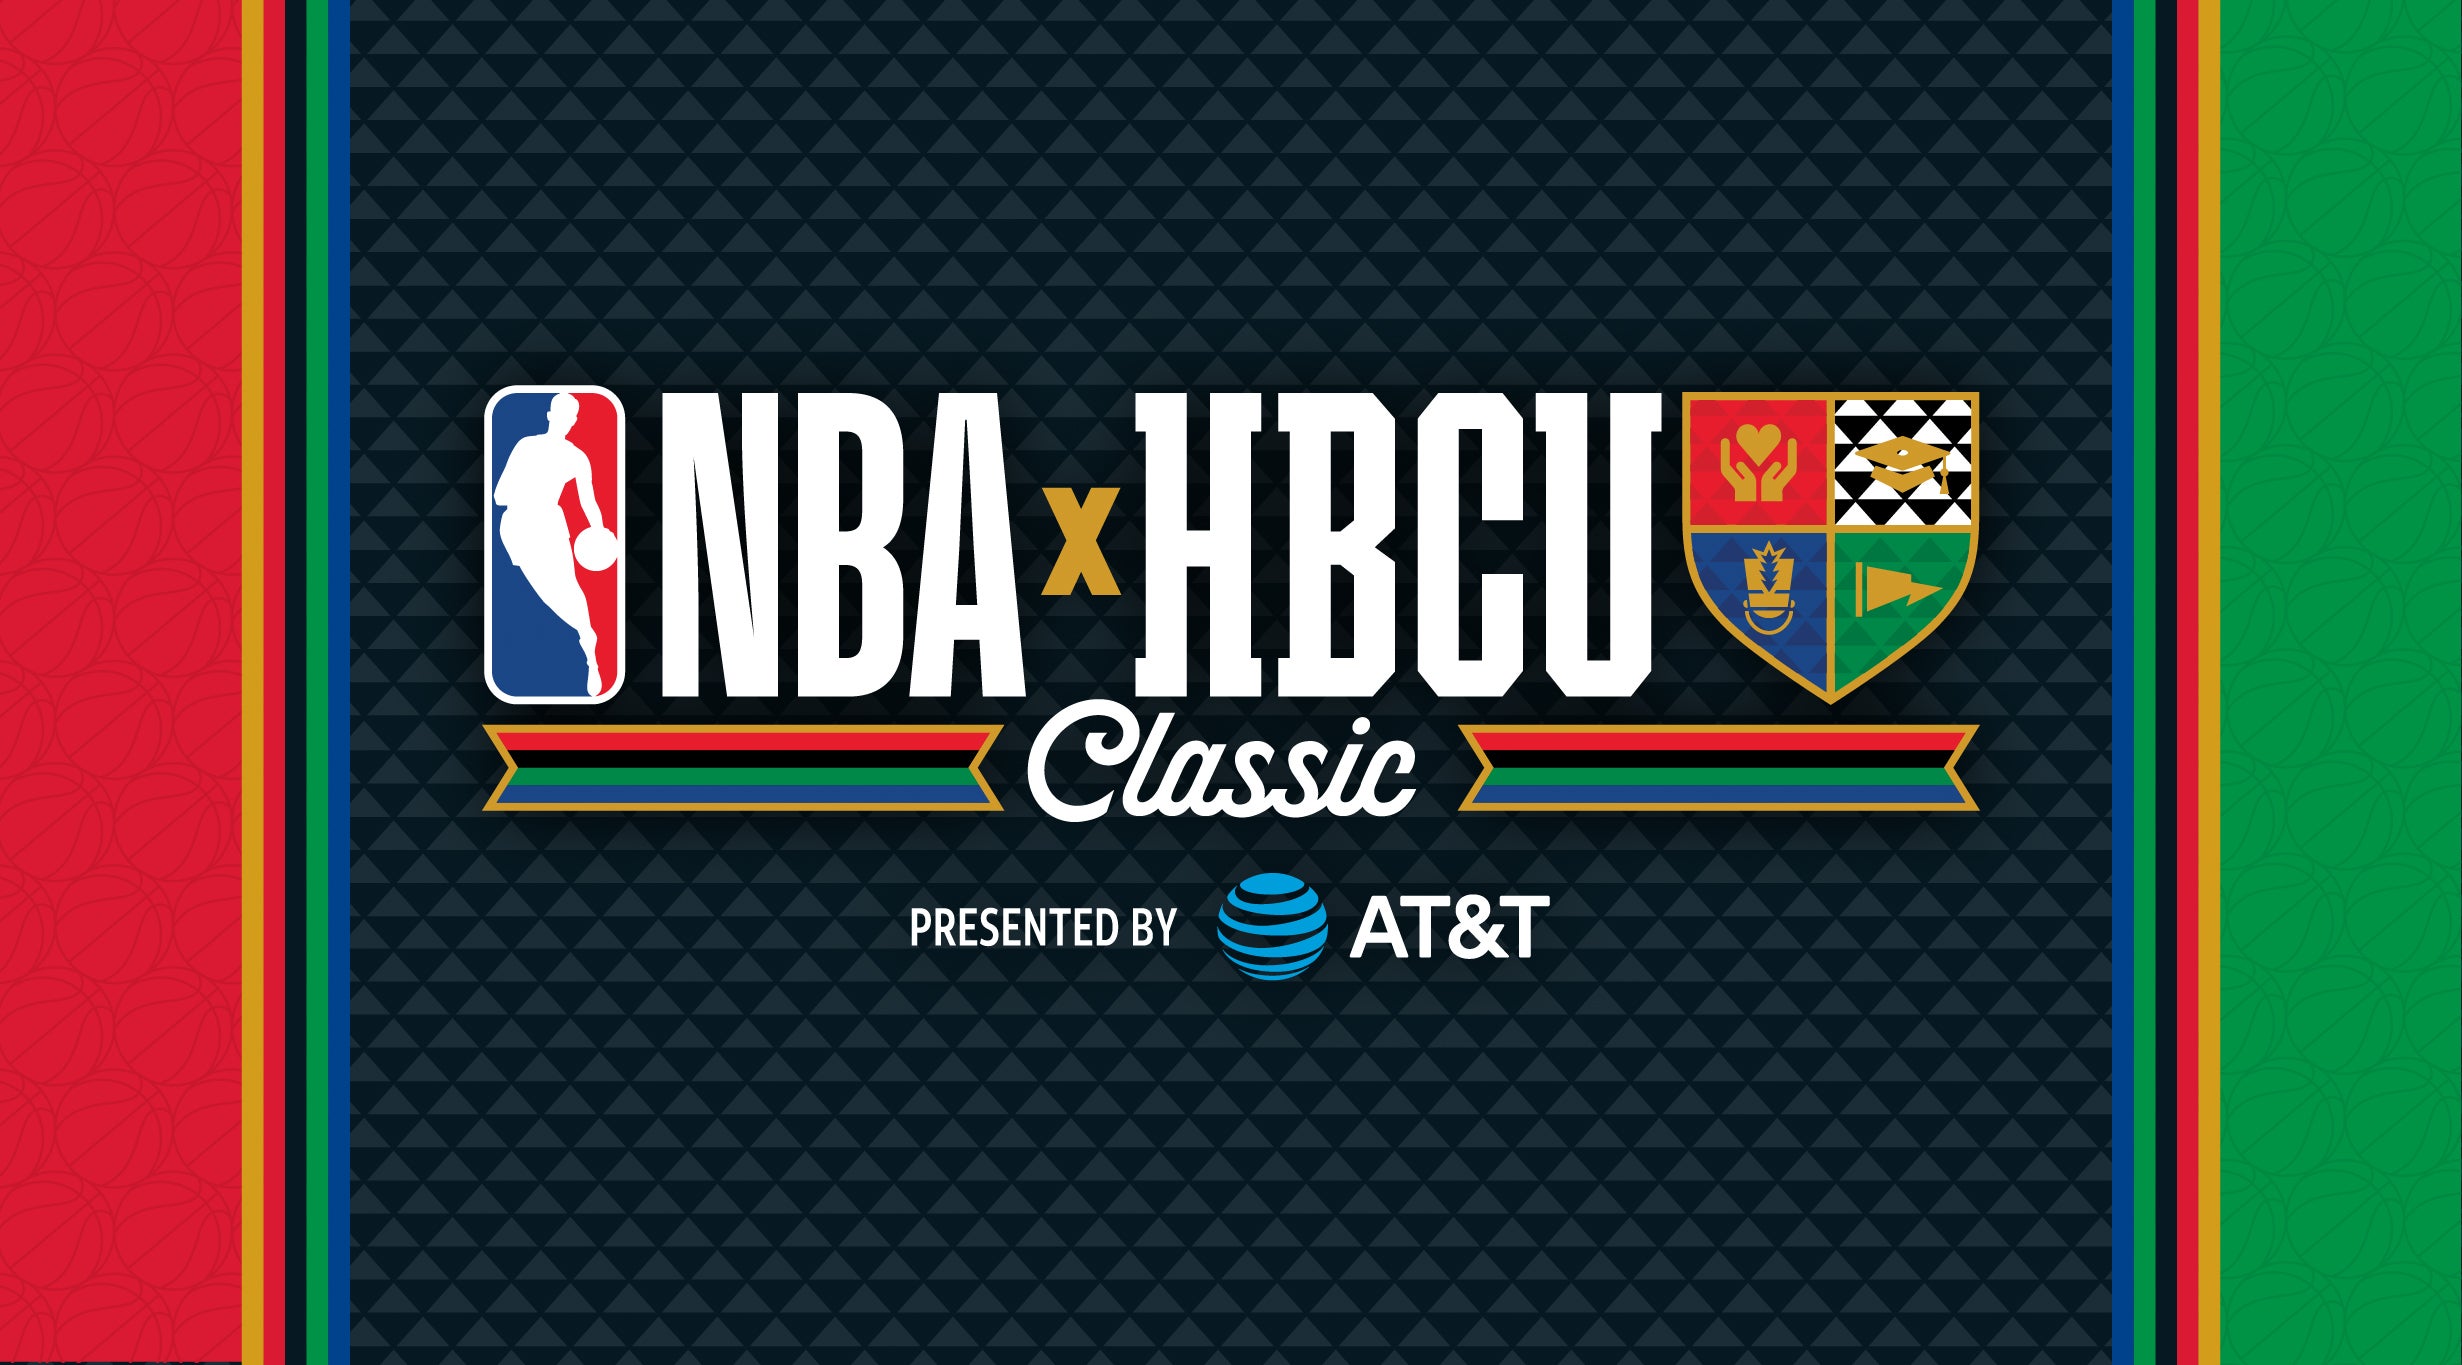 2024 NBA HBCU Classic Presented by AT&T February 17, 2024 Indianapolis